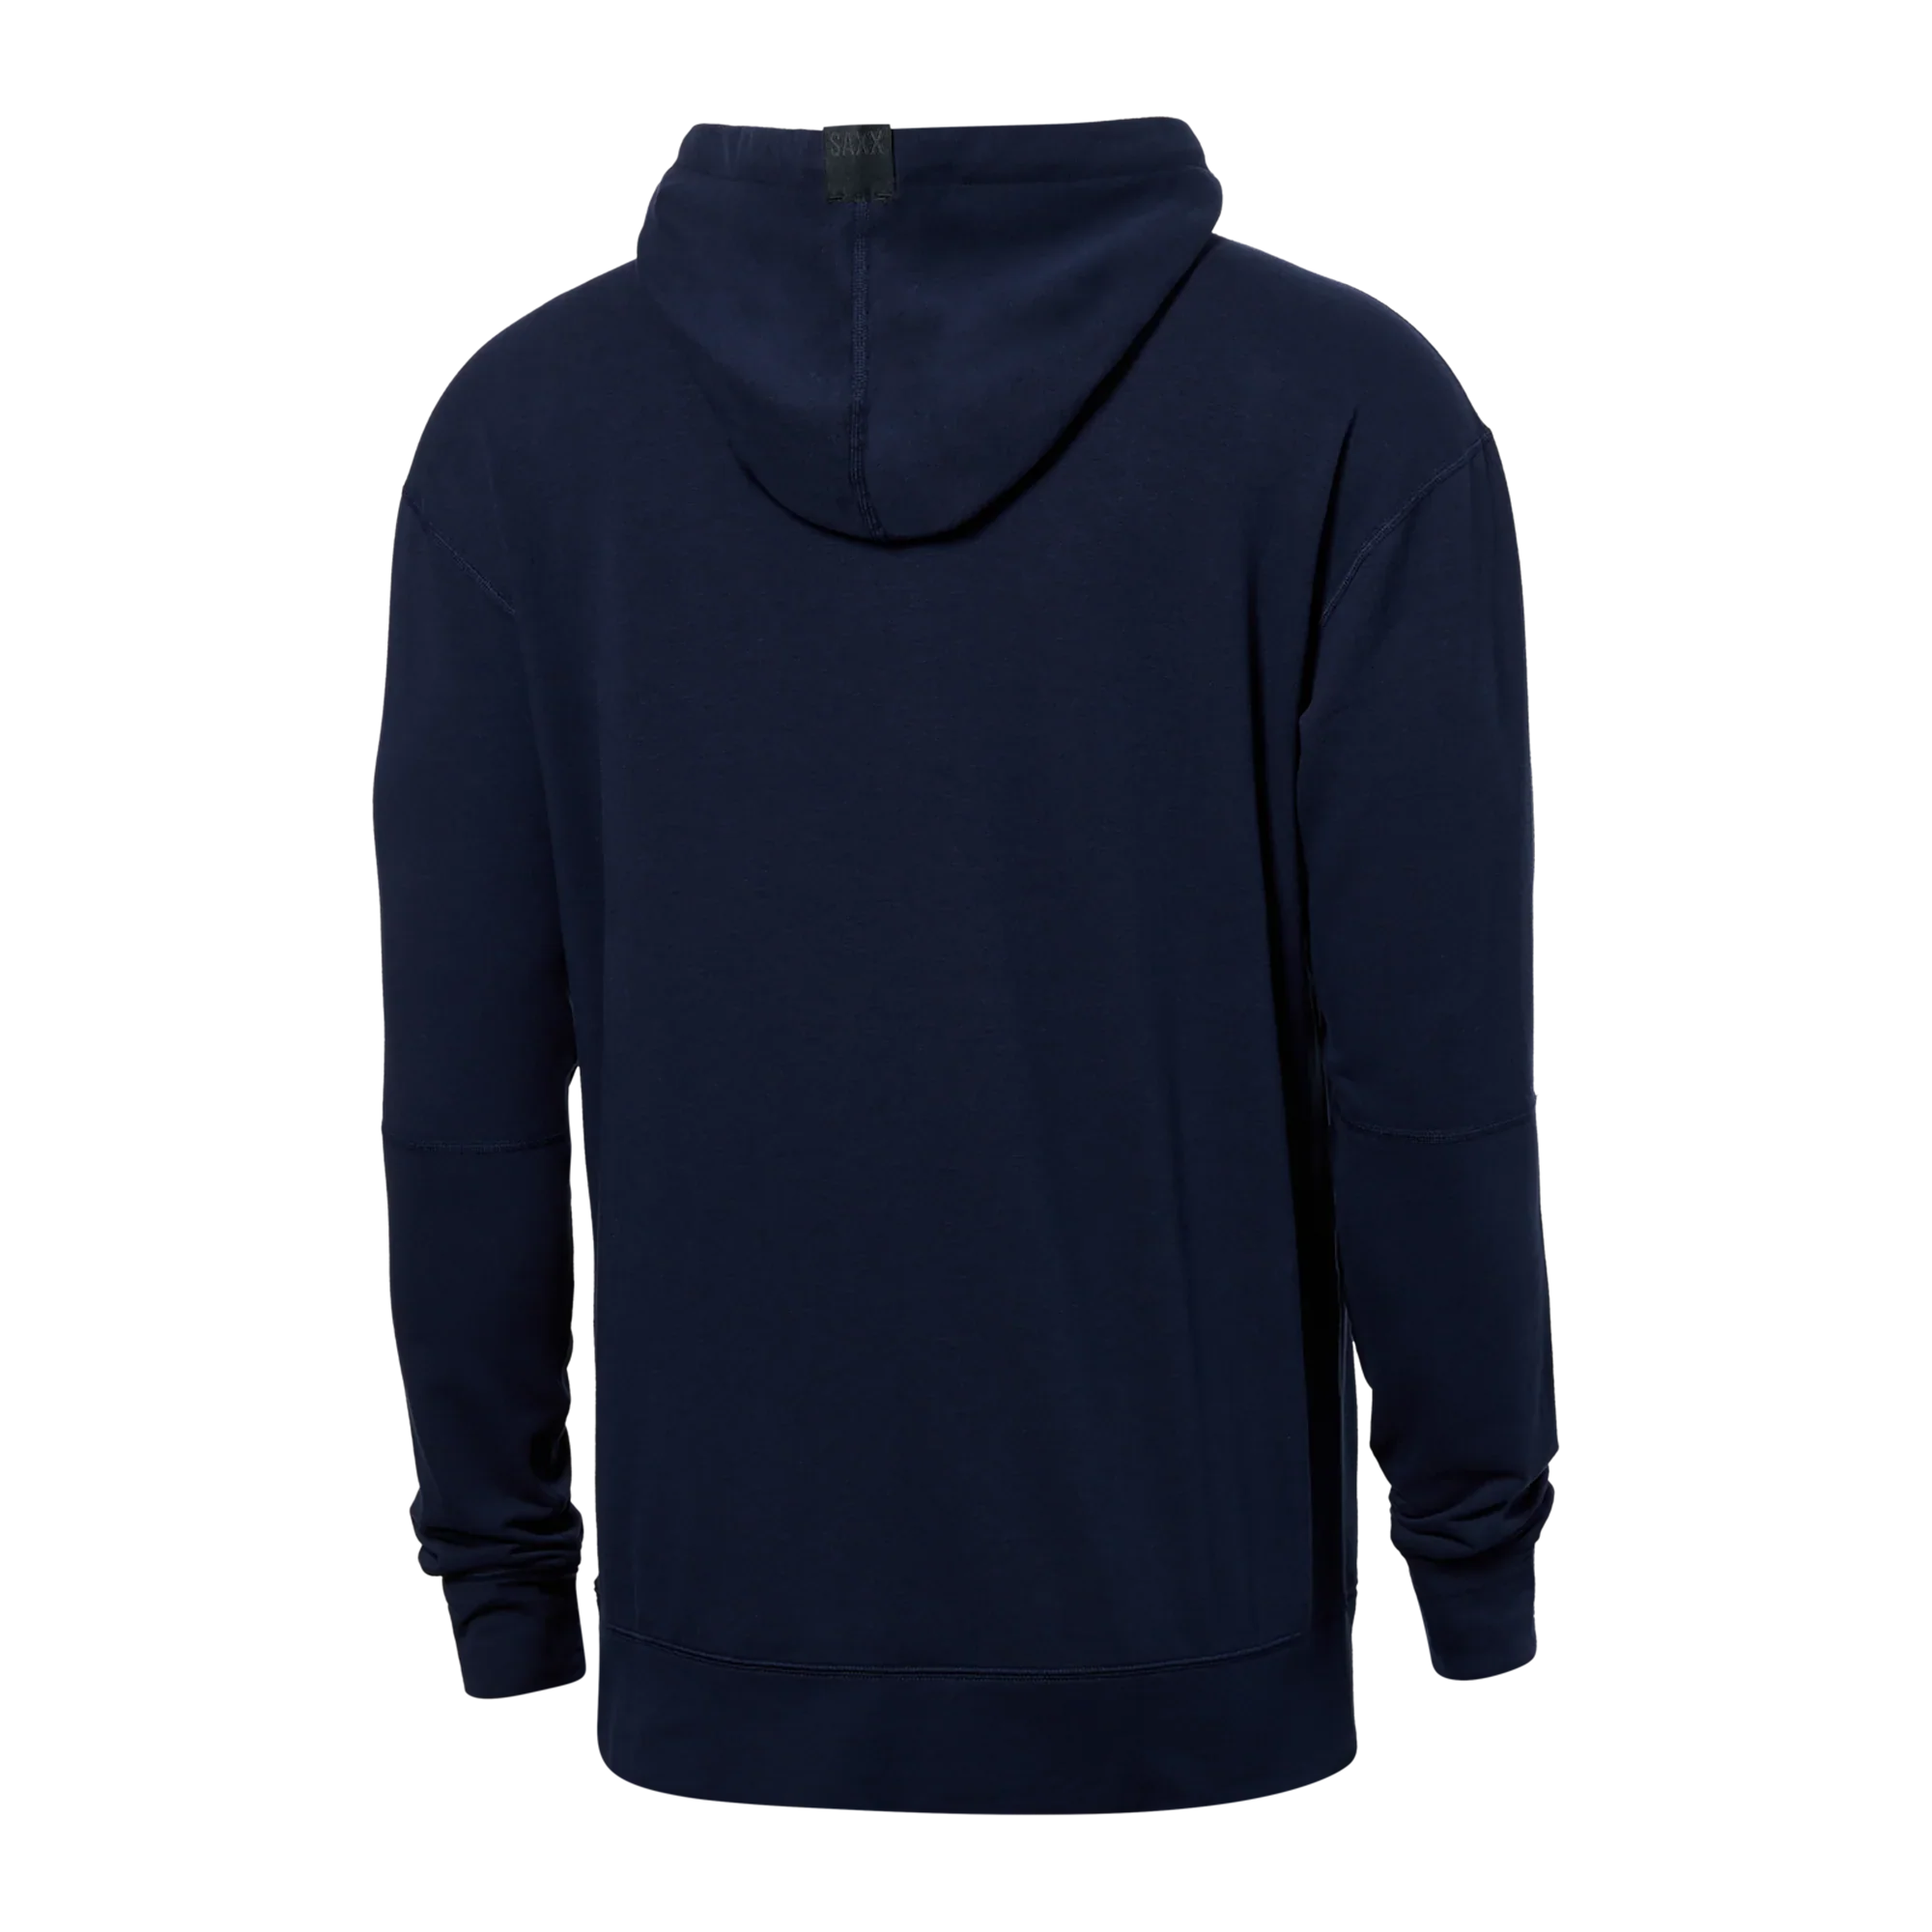 'SAXX 3Six Five Hoodie' in 'Navy' colour